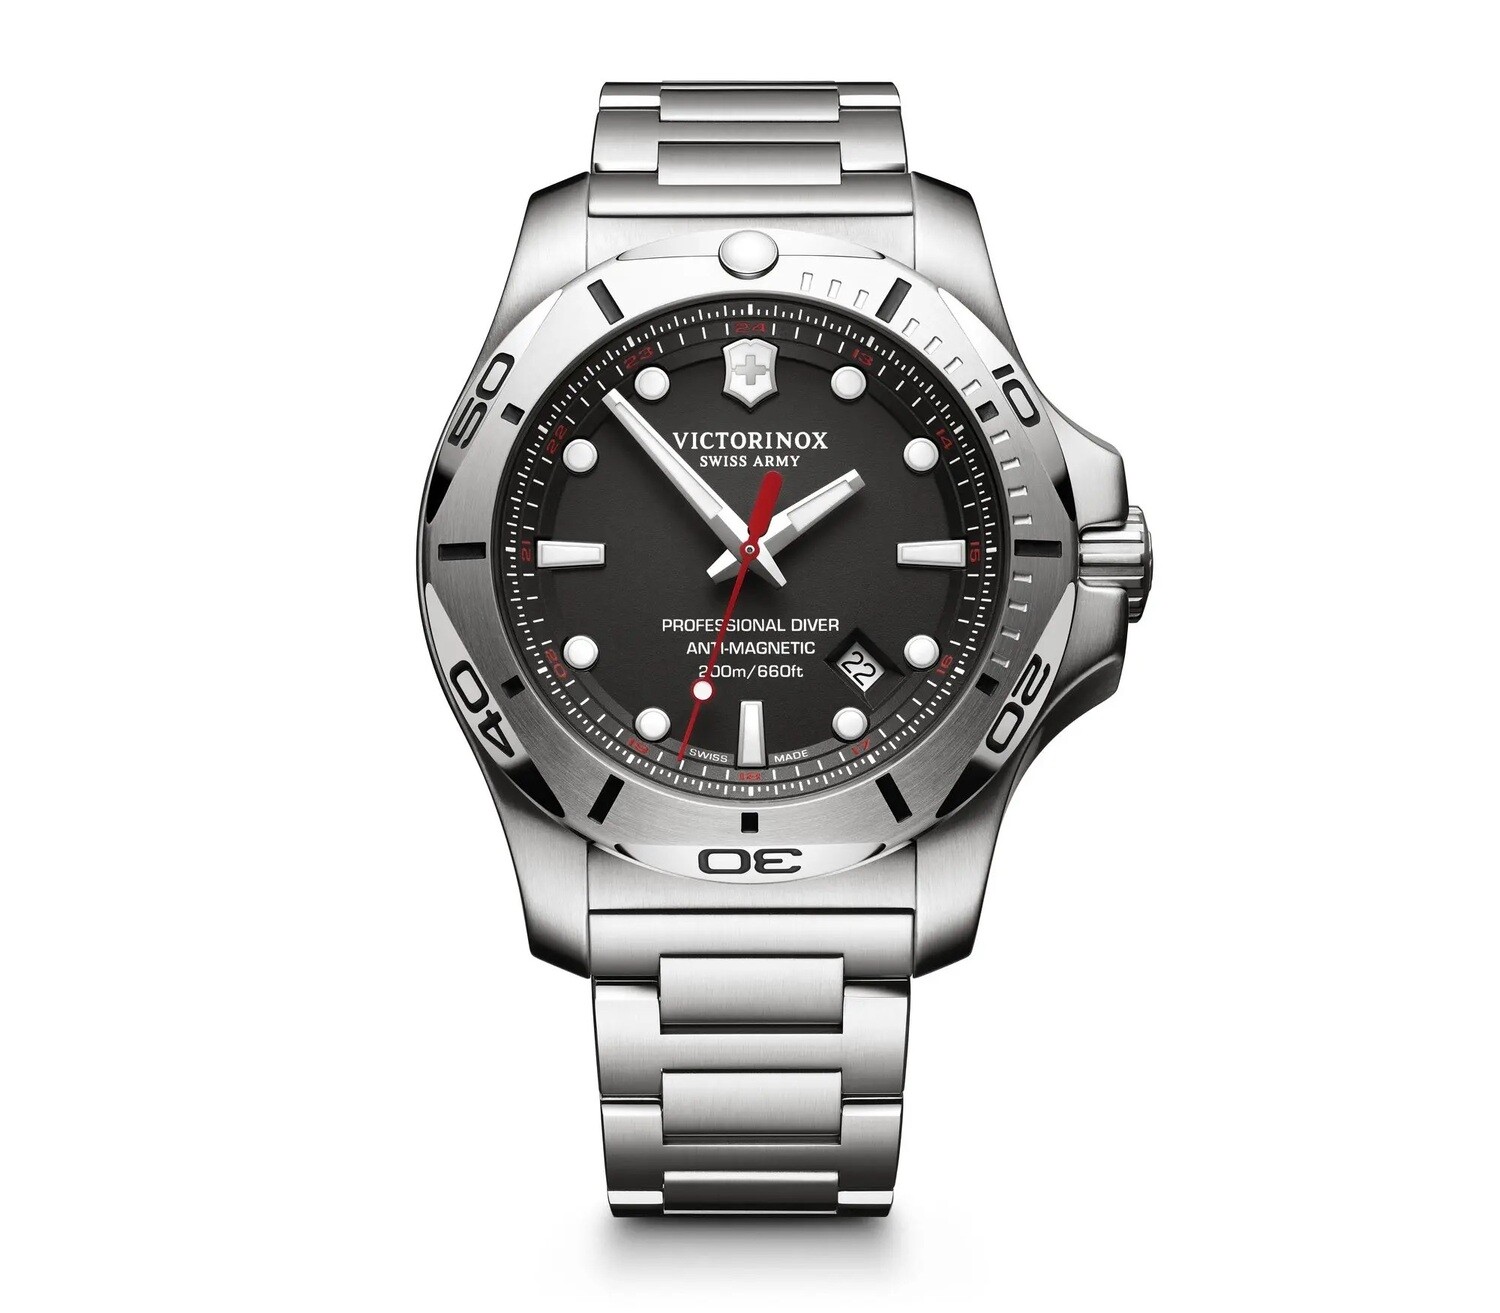 Victorinox Professional Diver 241781 INOX 45mm ANTI-MAGNETIC 200M Stainless Steel Black Dial Men's Watch Professional automatic divers men's watch 200m Water resist Anti-magnetic resistance SWISS MADE